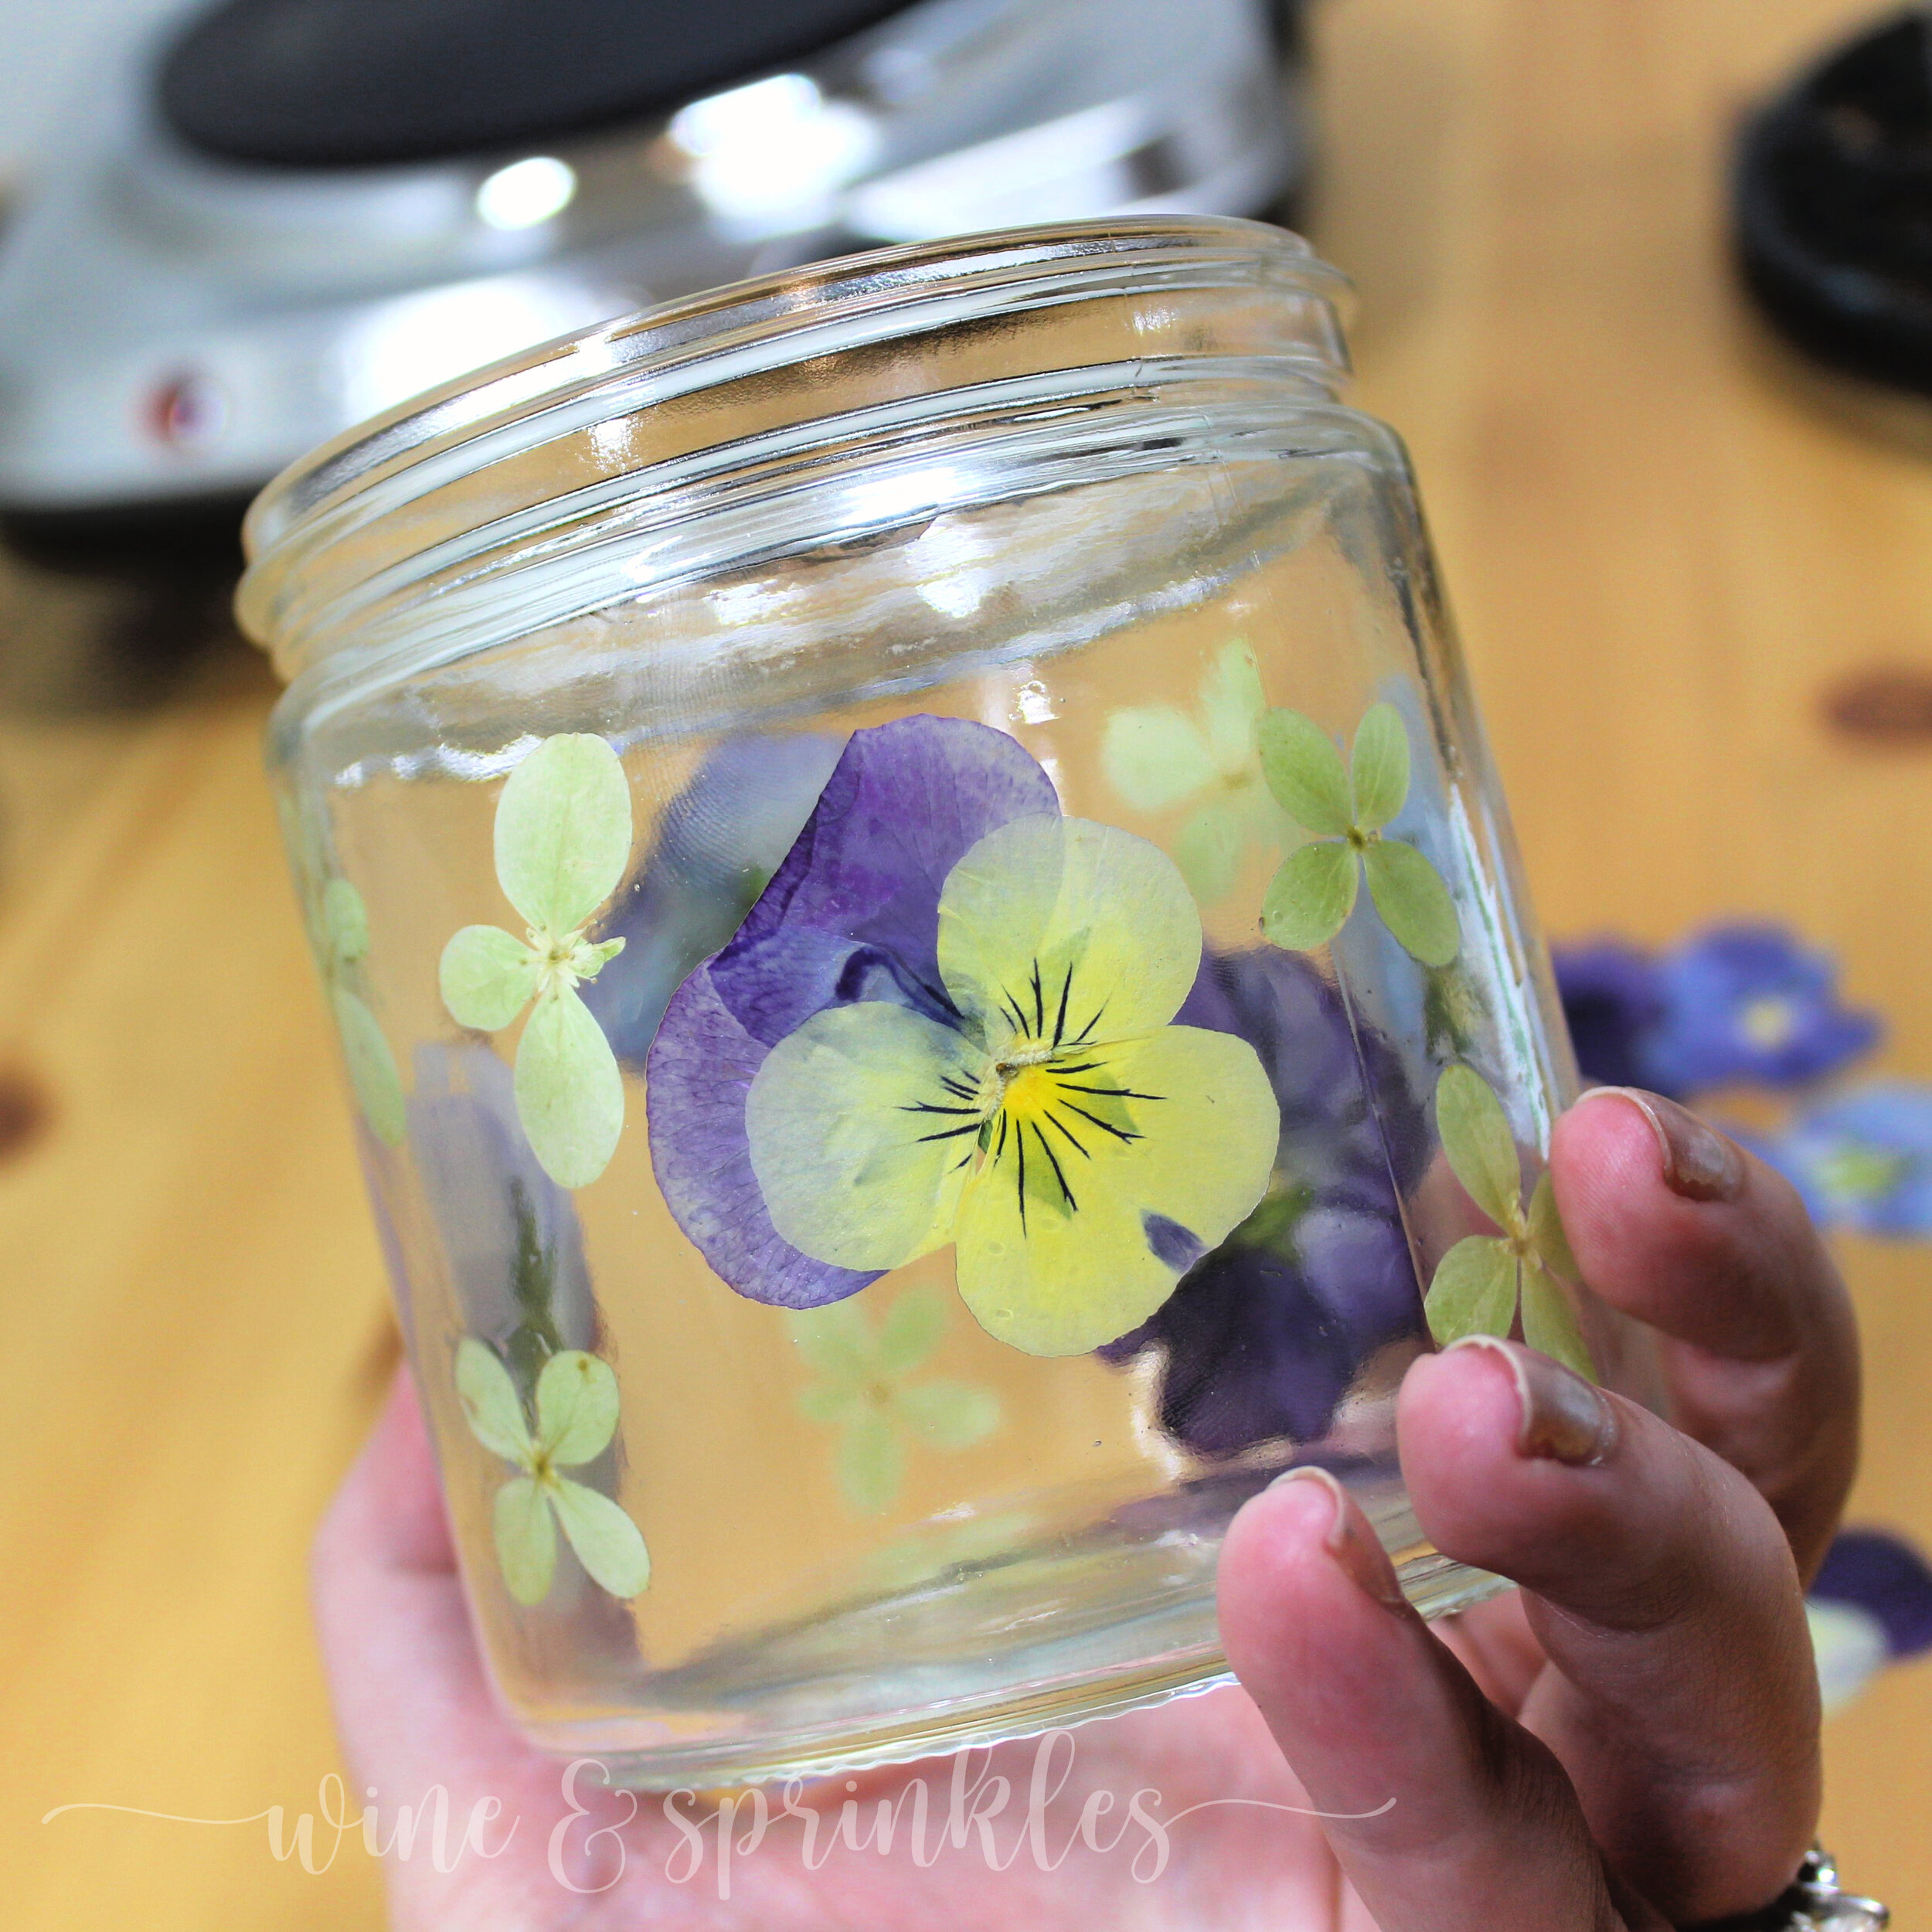 DIY Dried Flower Candle Tapers- Quick Dried Flower Craft